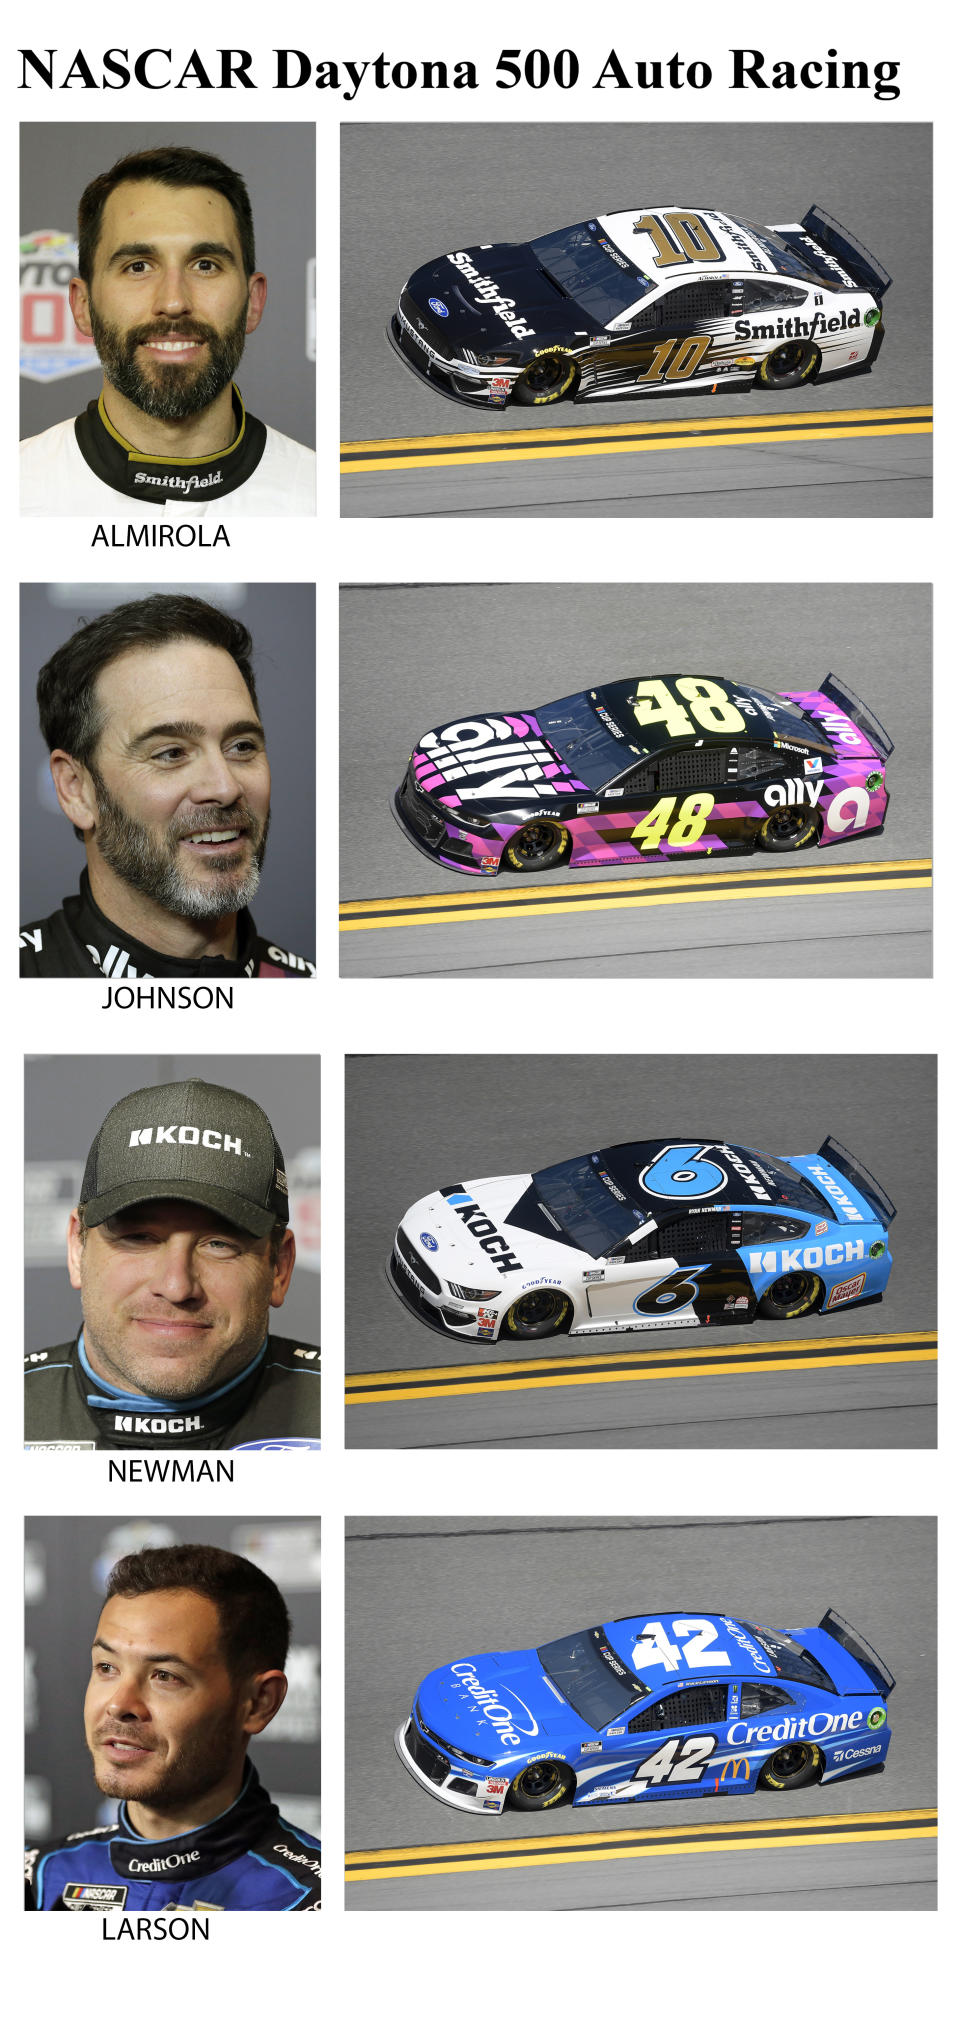 These photos taken in February 2020 show drivers in the starting lineup for Sunday's NASCAR Daytona 500 auto race in Daytona Beach, Fla. From top are Aric Almirola, starting in the fifth position; Jimmie Johnson, sixth position; Ryan Newman, seventh position and Kyle Larson, eighth position. (AP Photo)